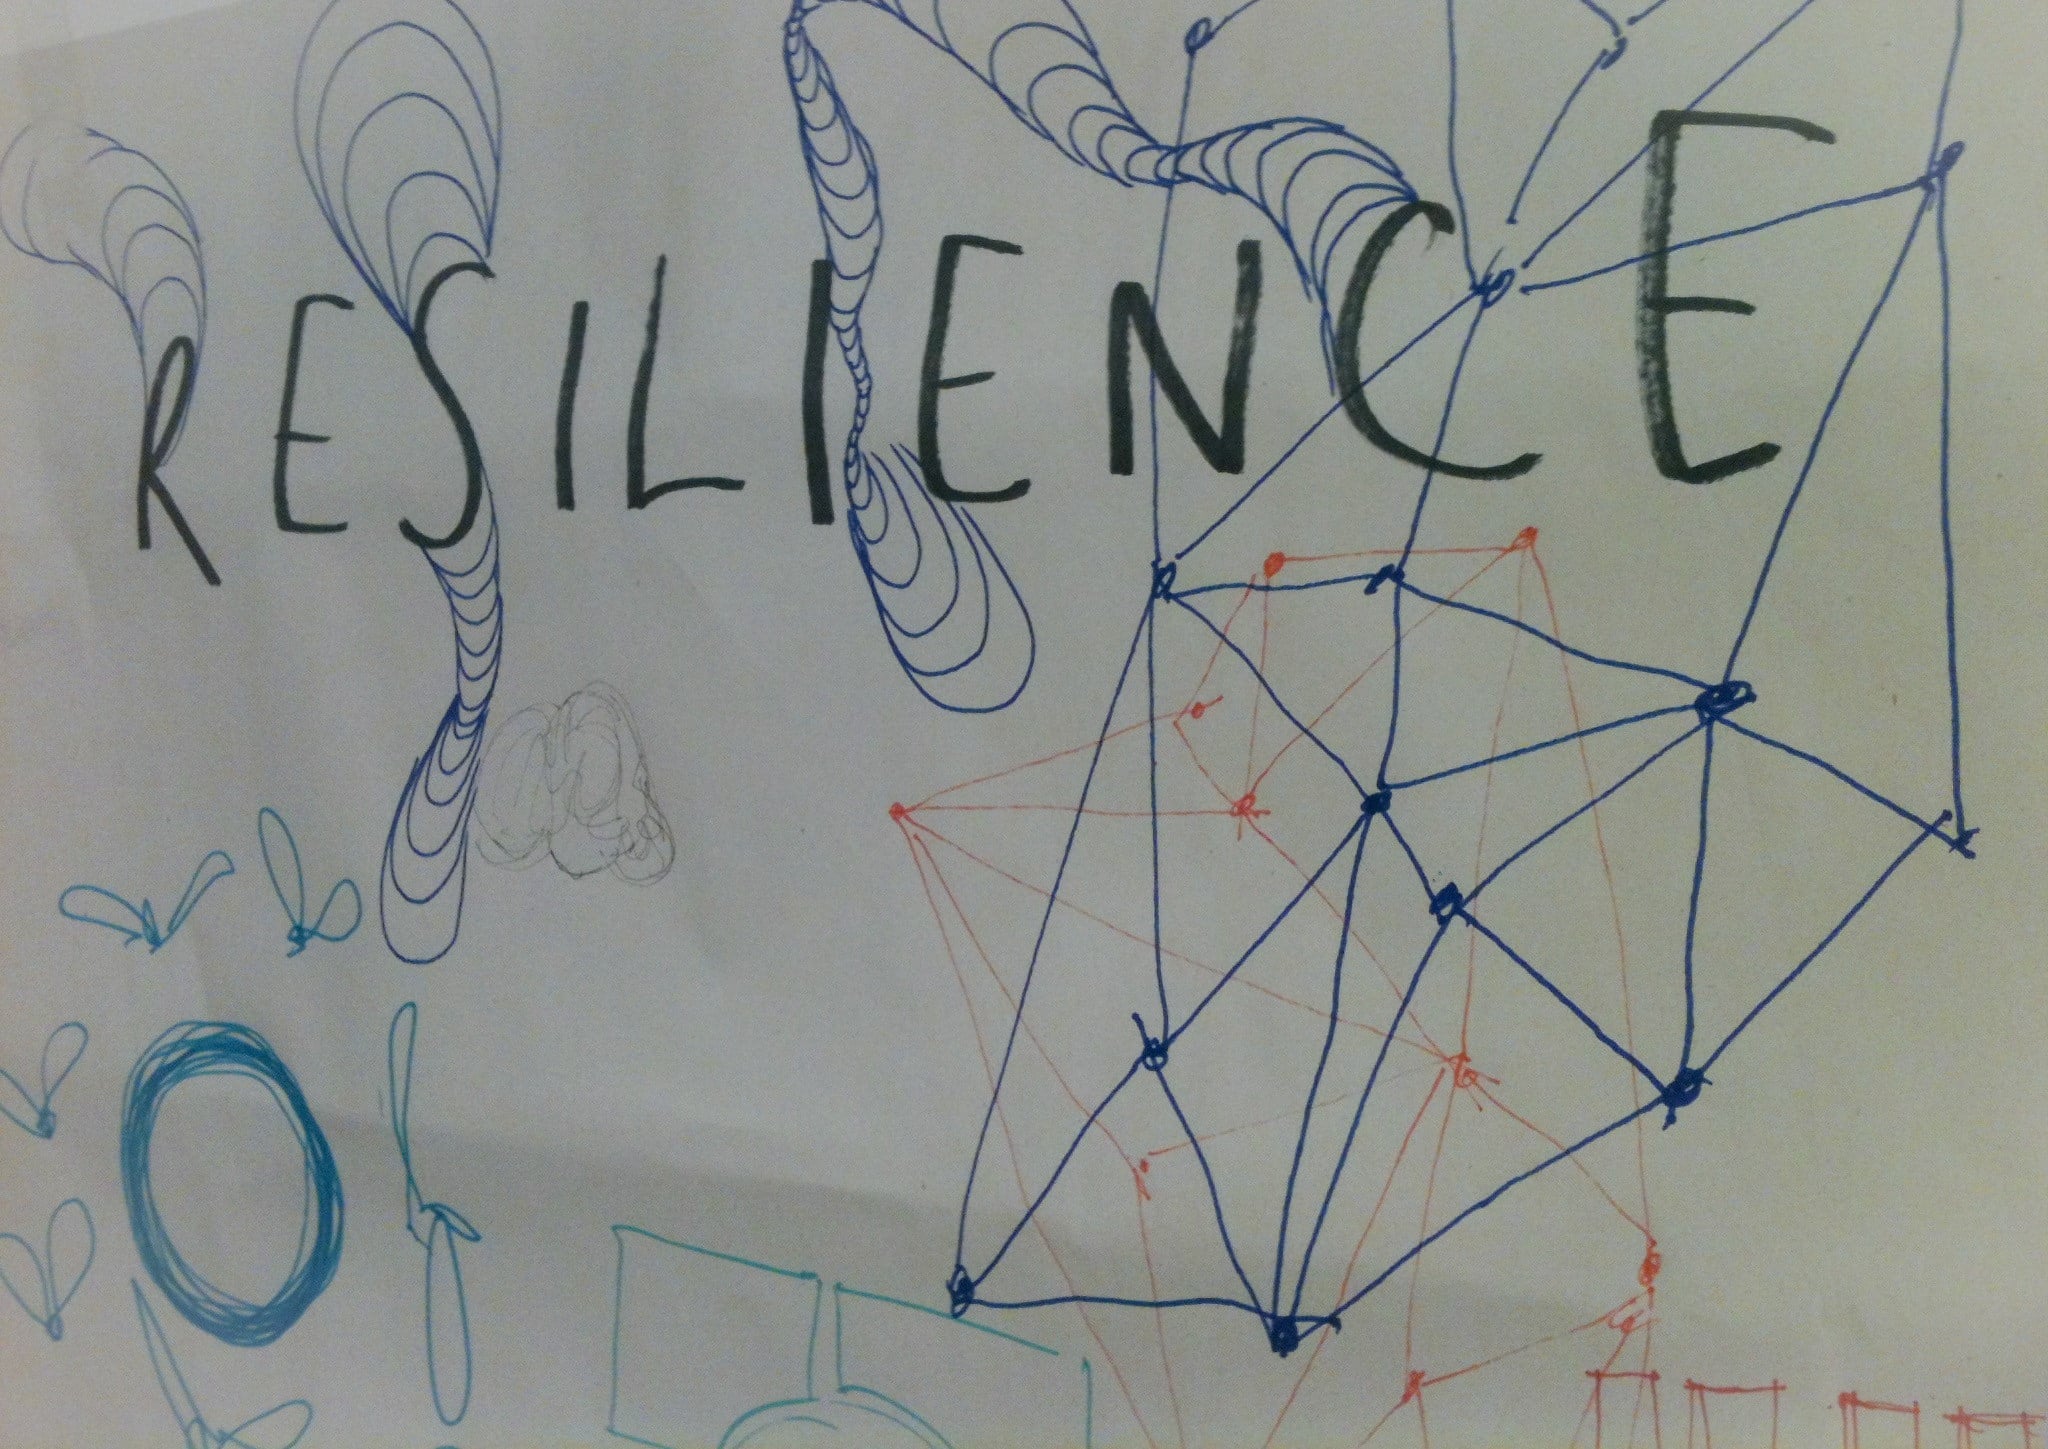 the word resilience written on a piece of paper